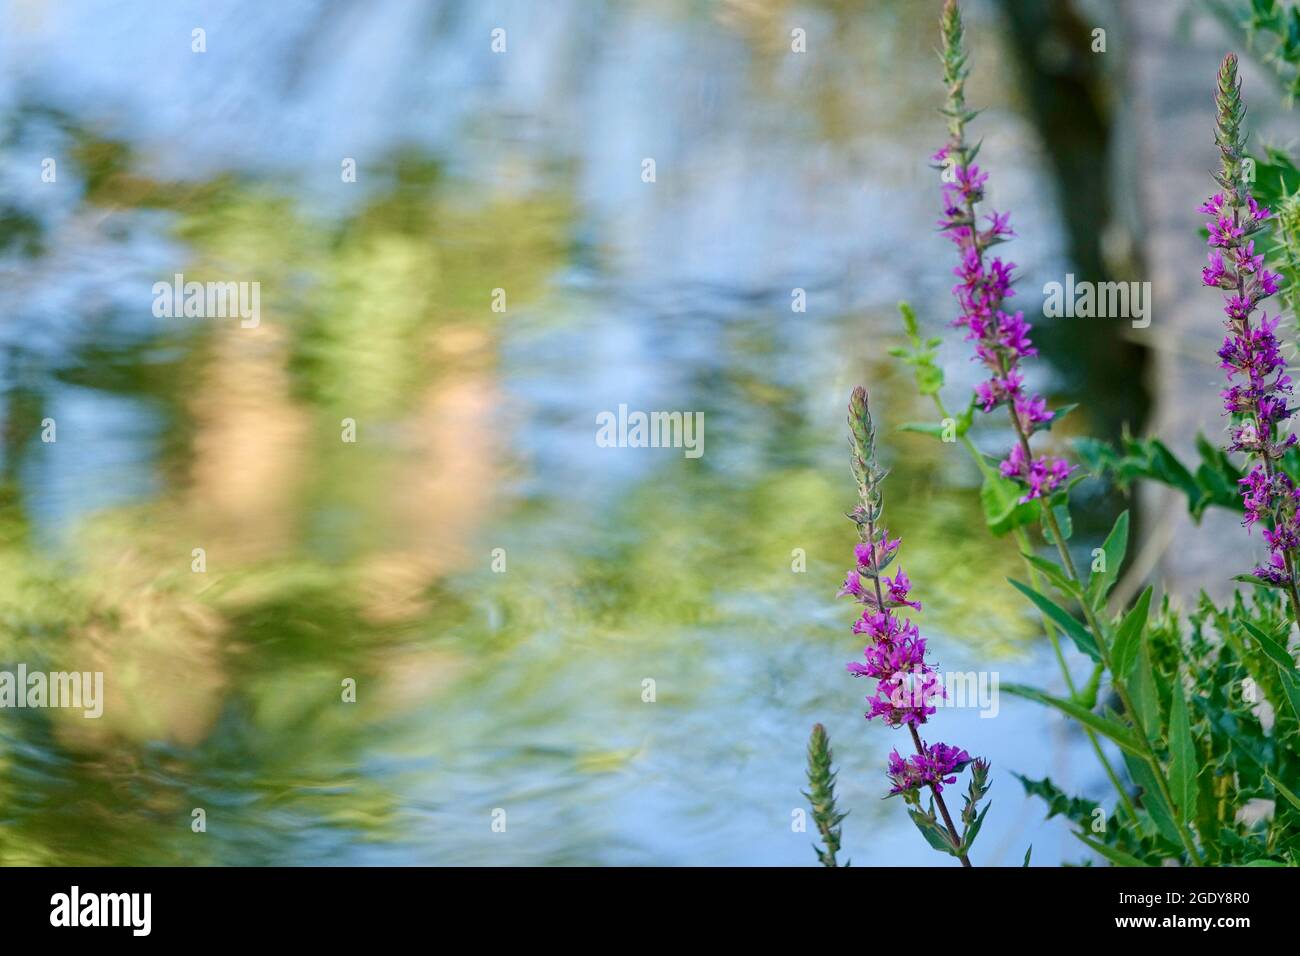 Purple loosestrife or arroyuella flowers (Lythrum salicaria) with plant reflections in the water in the background Stock Photo